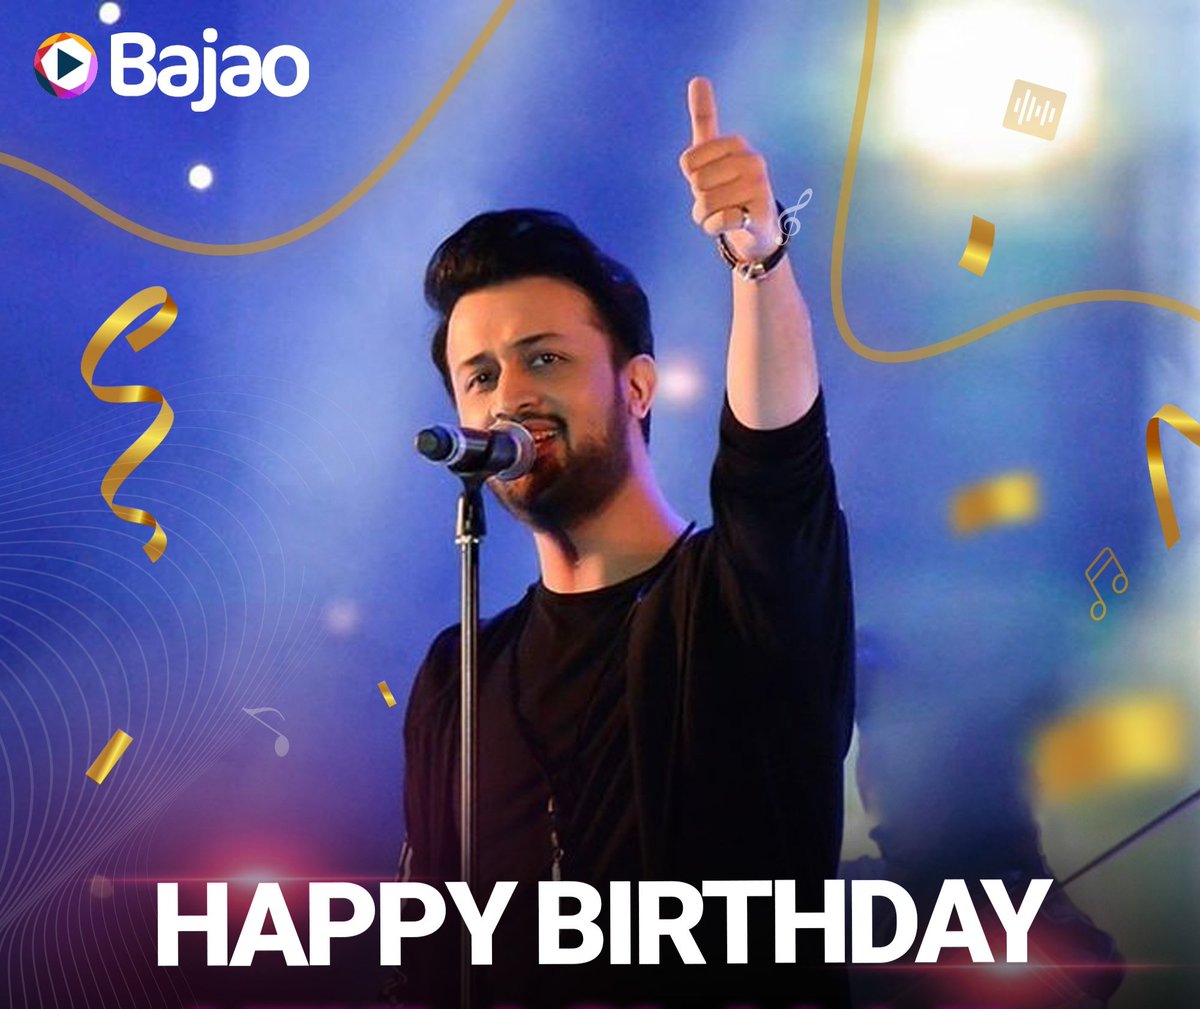 Happy Birthday Atif Aslam! May you continue to entertain and win hearts with your songs 🎂🎉
.
.
#atifaslam #bajaomusic #popularartists #singer #pakistanisongs #pakistanimusic